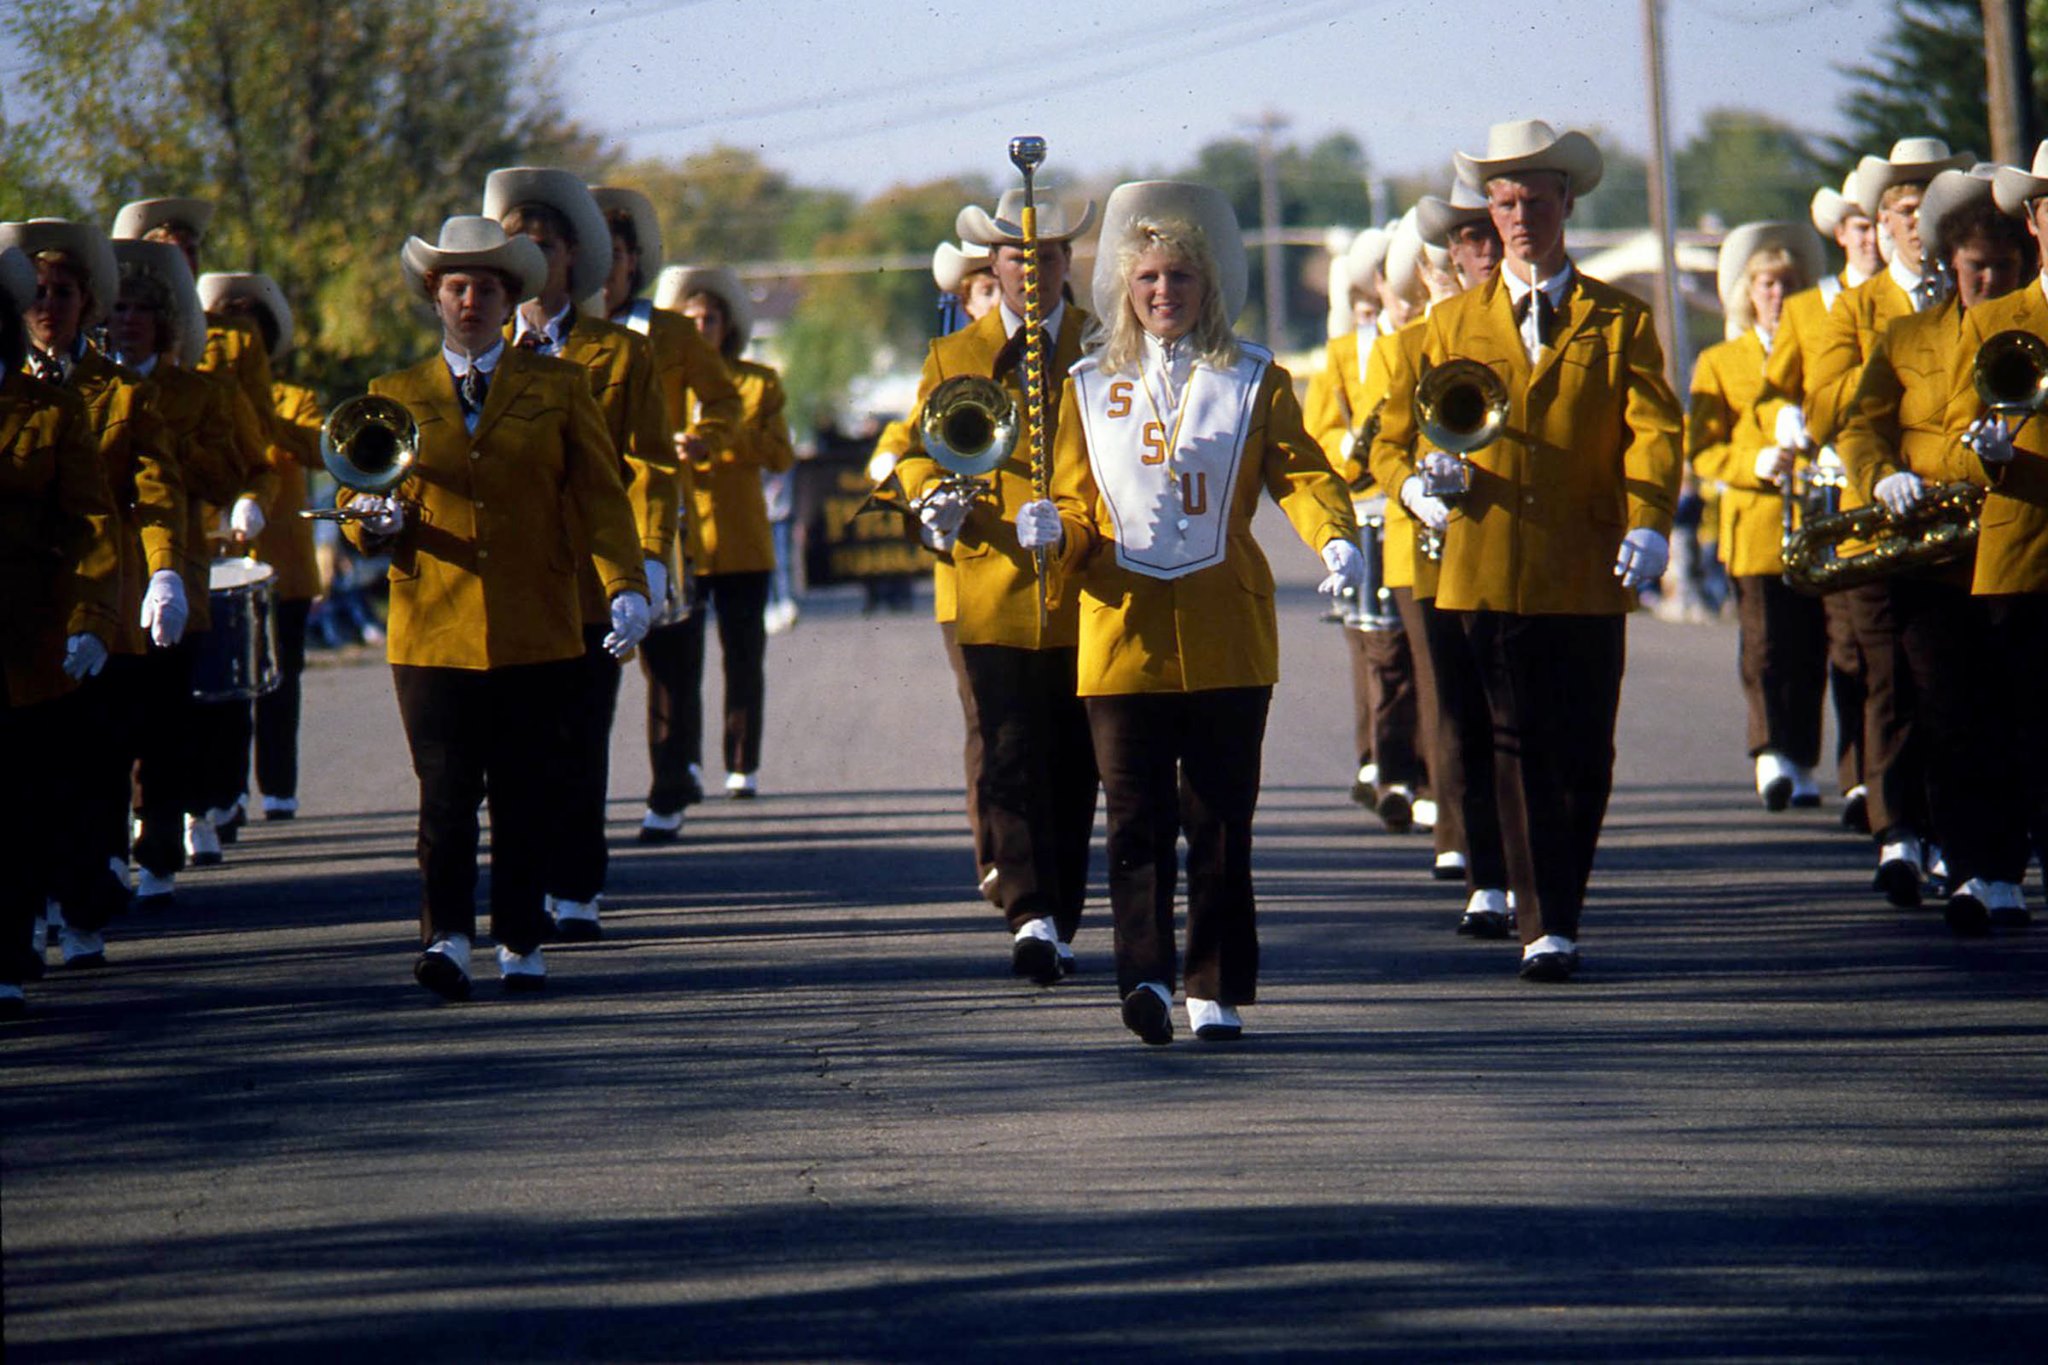 SMSU Marching band in parade